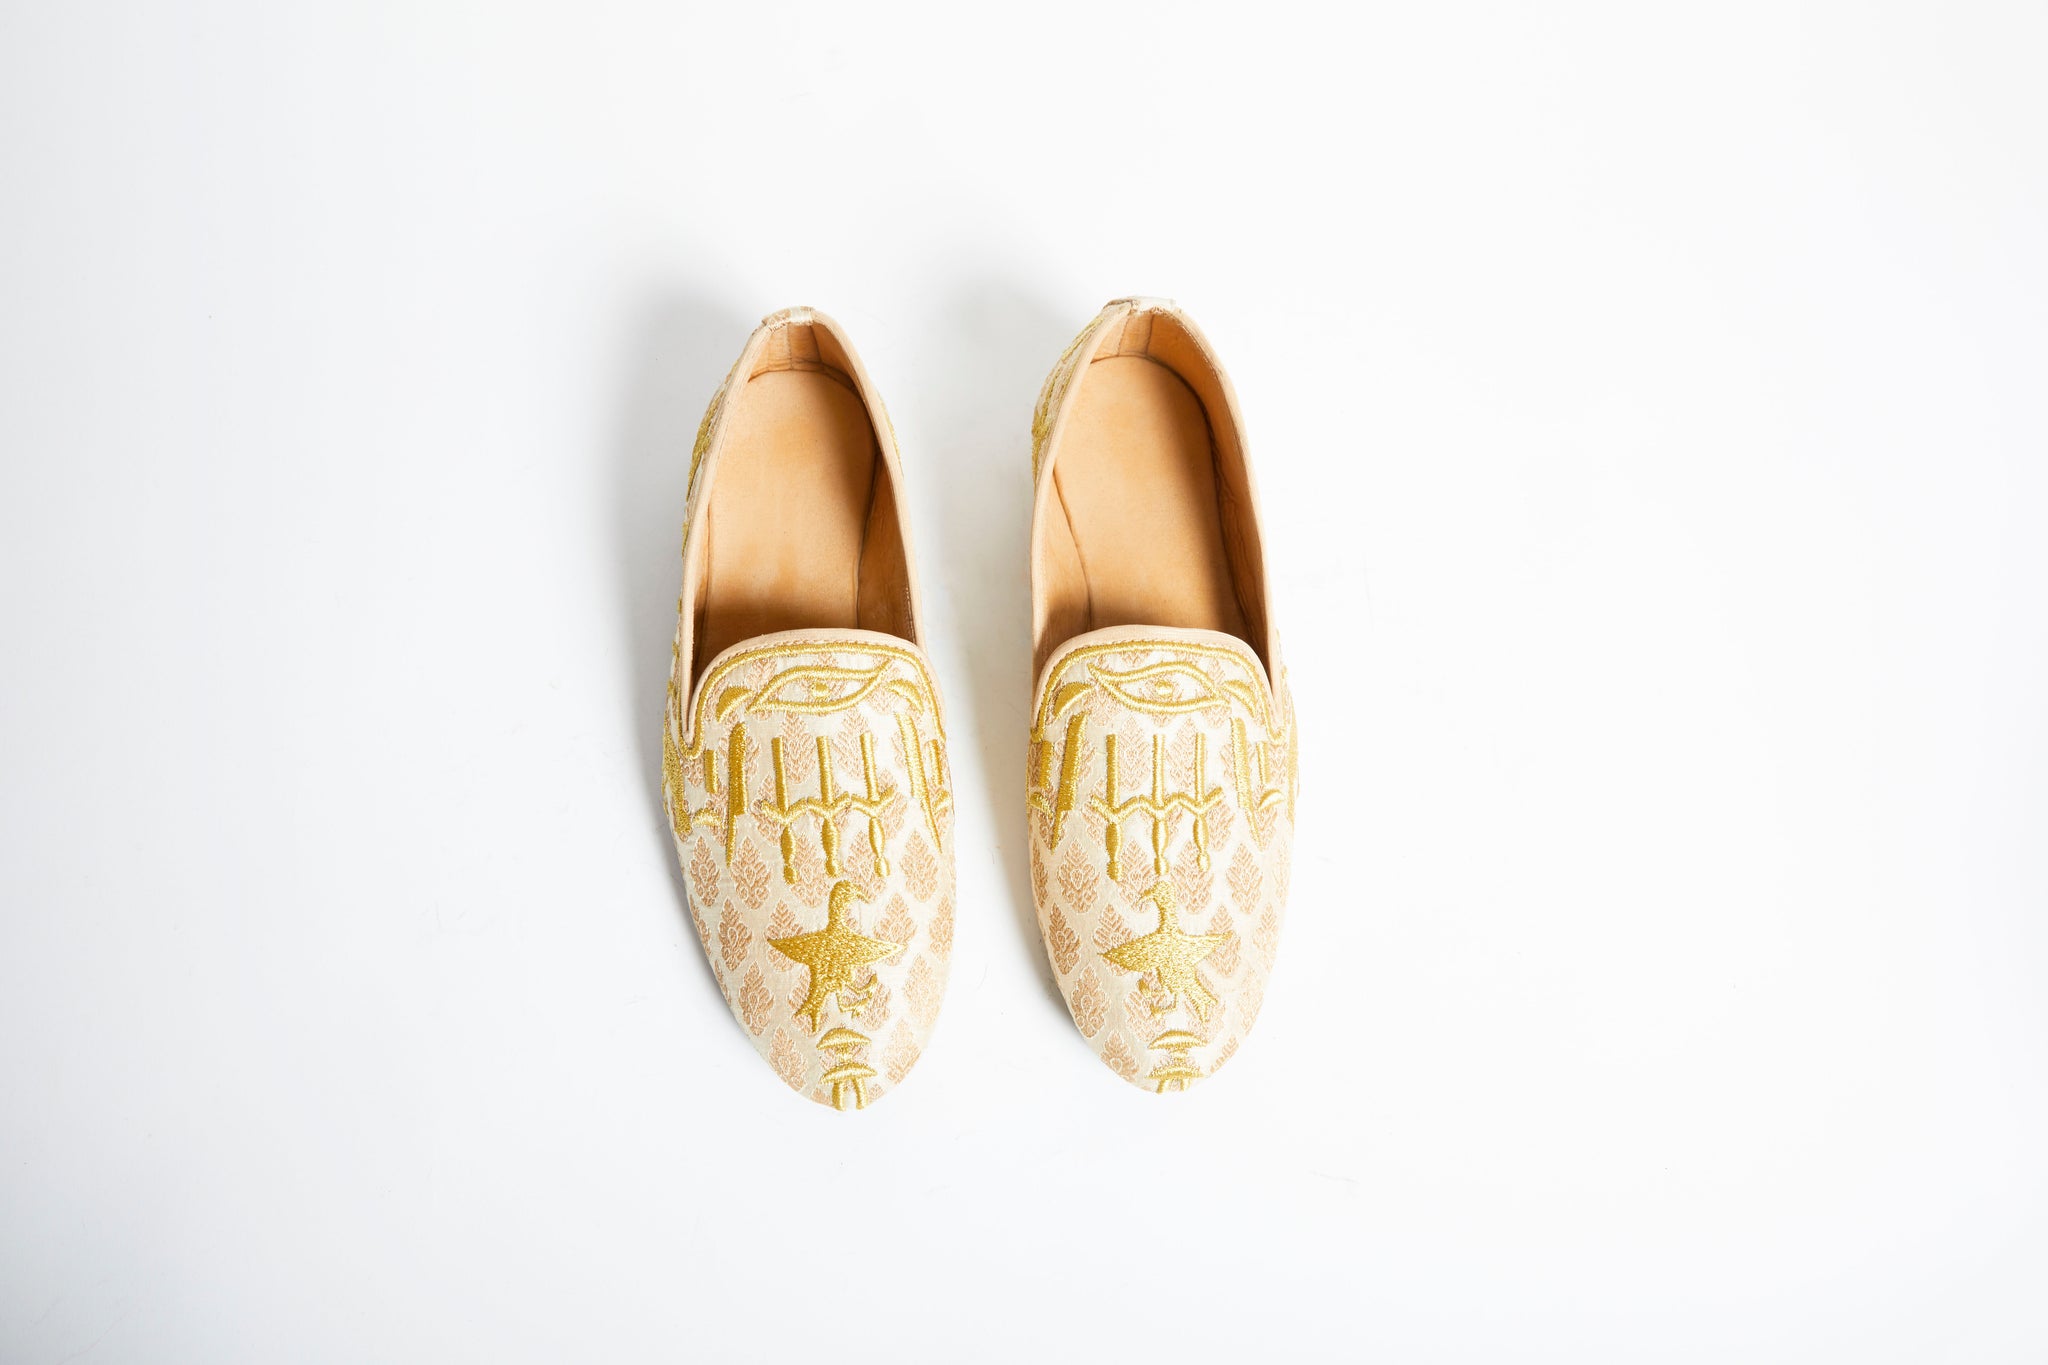 The Palace Loafers